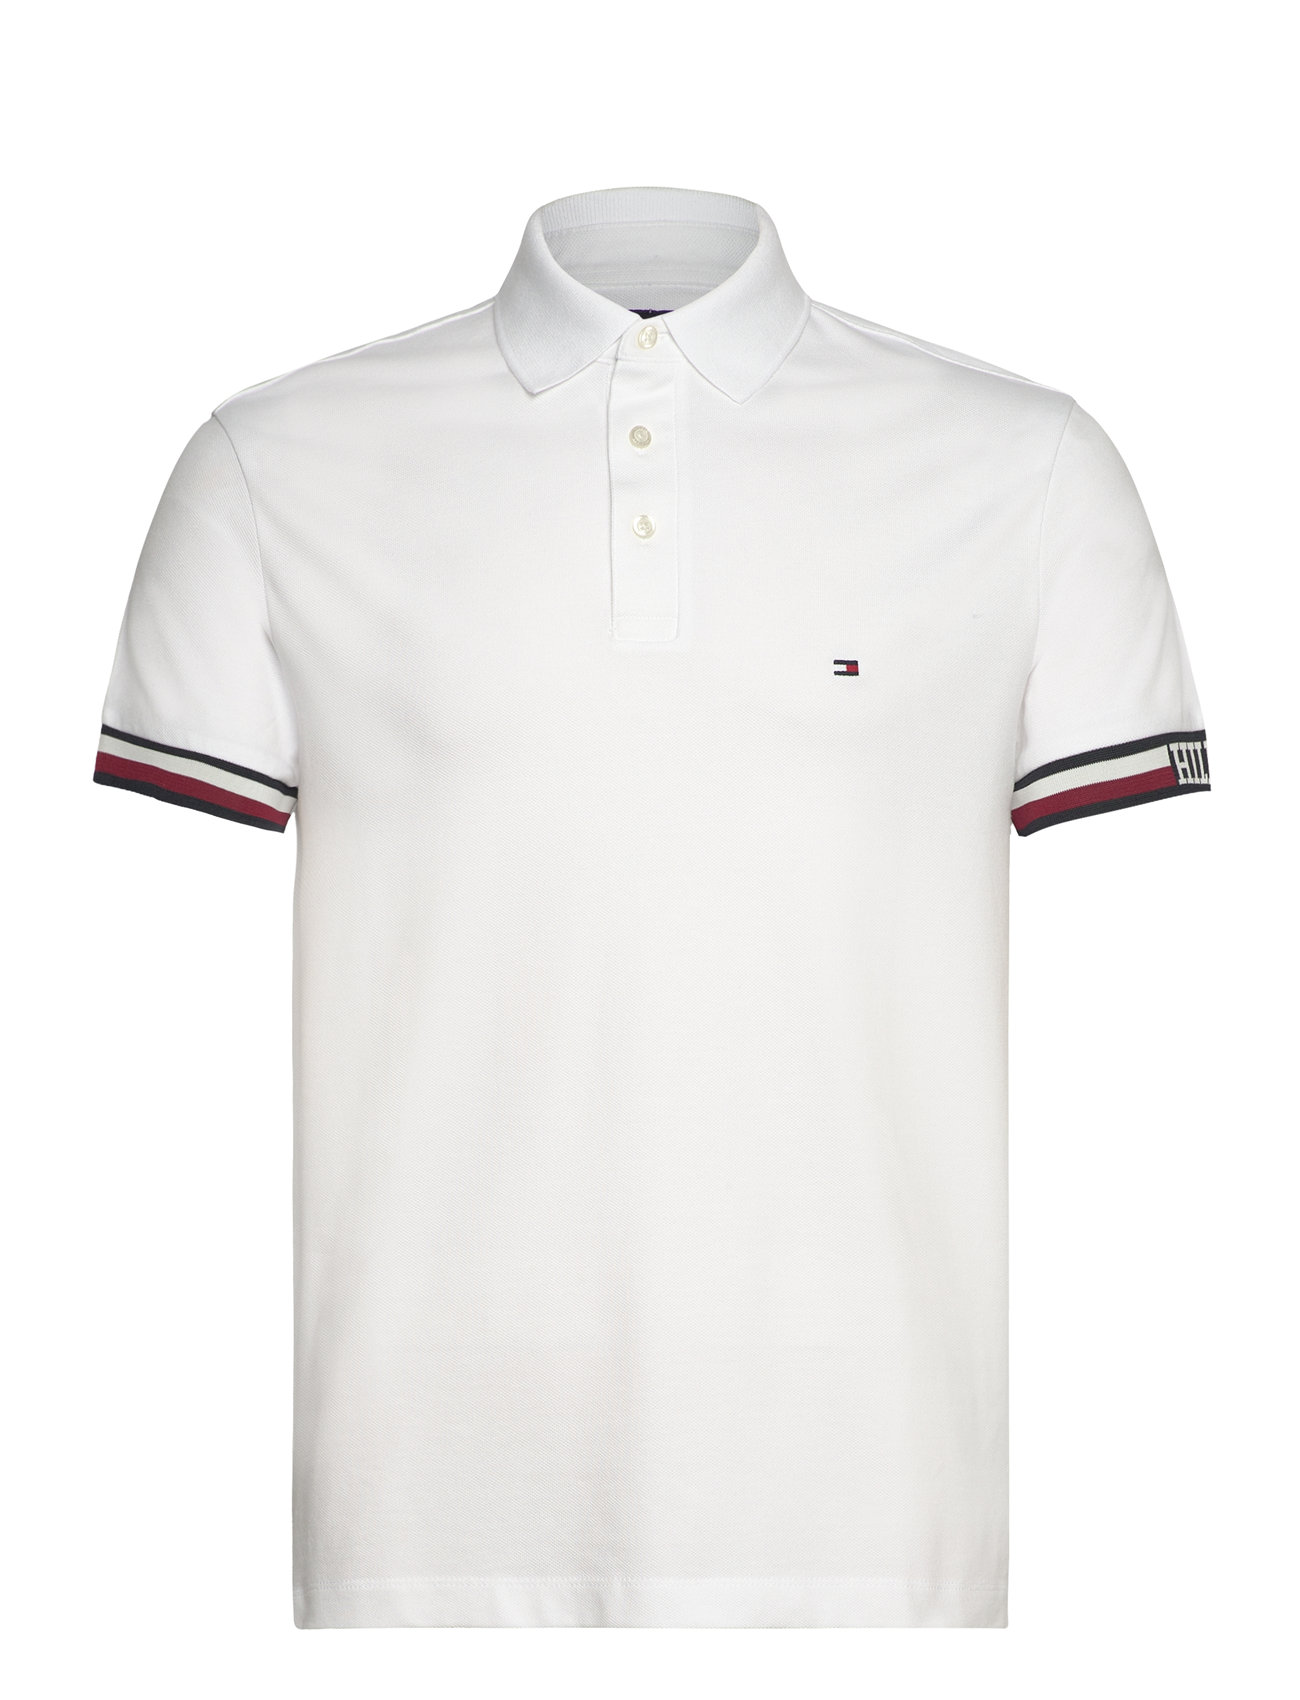 Monotype Flag Cuff Slim Fit Polo Tops Polos Short-sleeved White Tommy Hilfiger